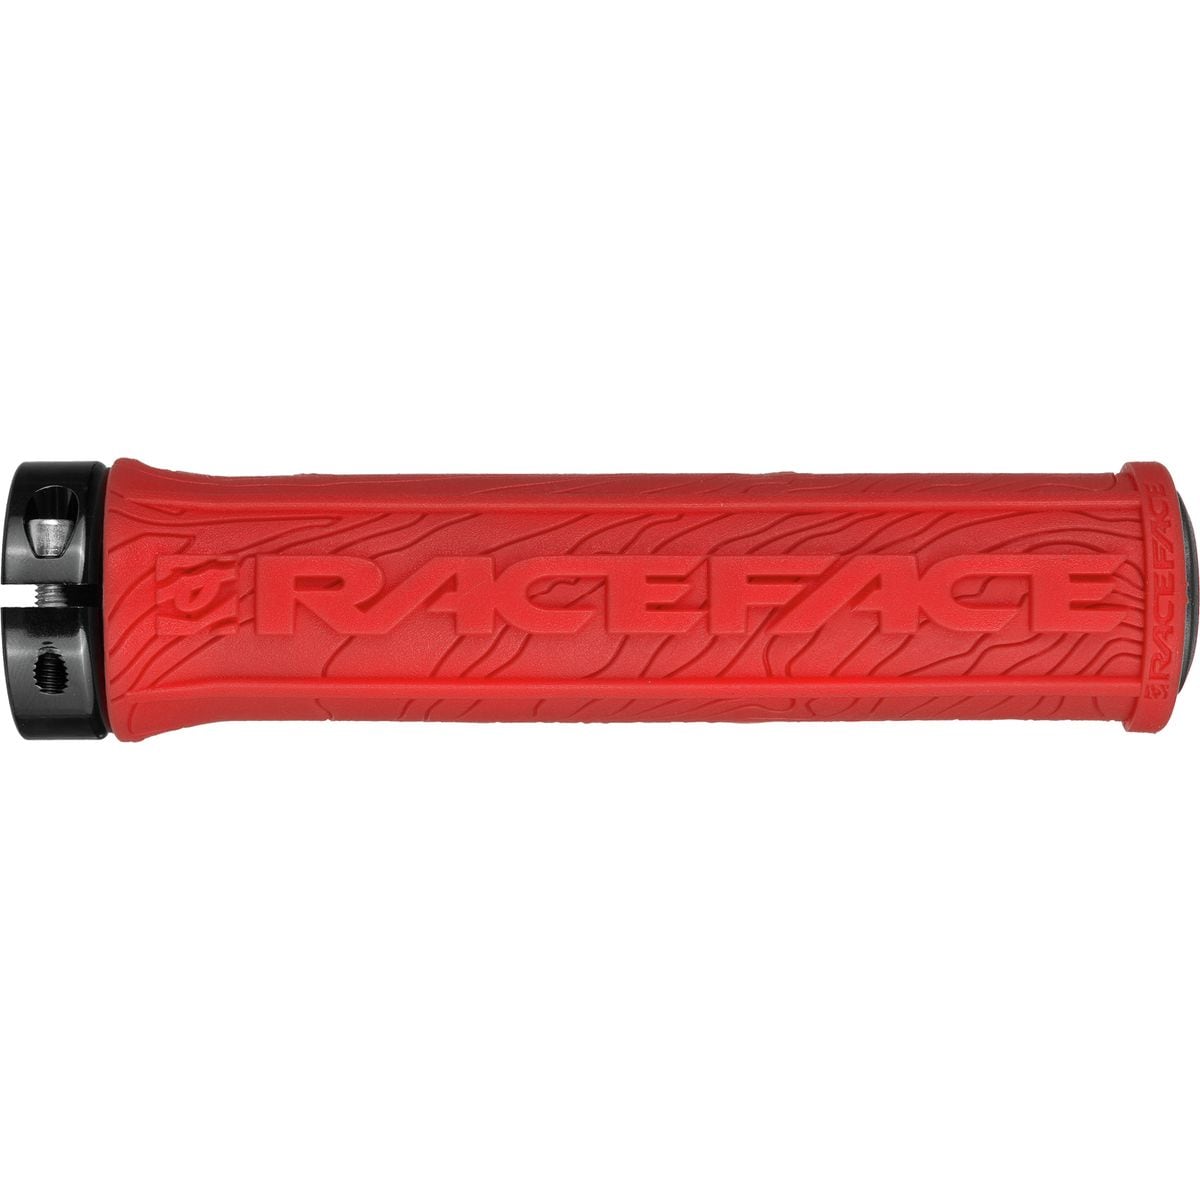 Race Face Half Nelson Lock-On Grip Red, One Size